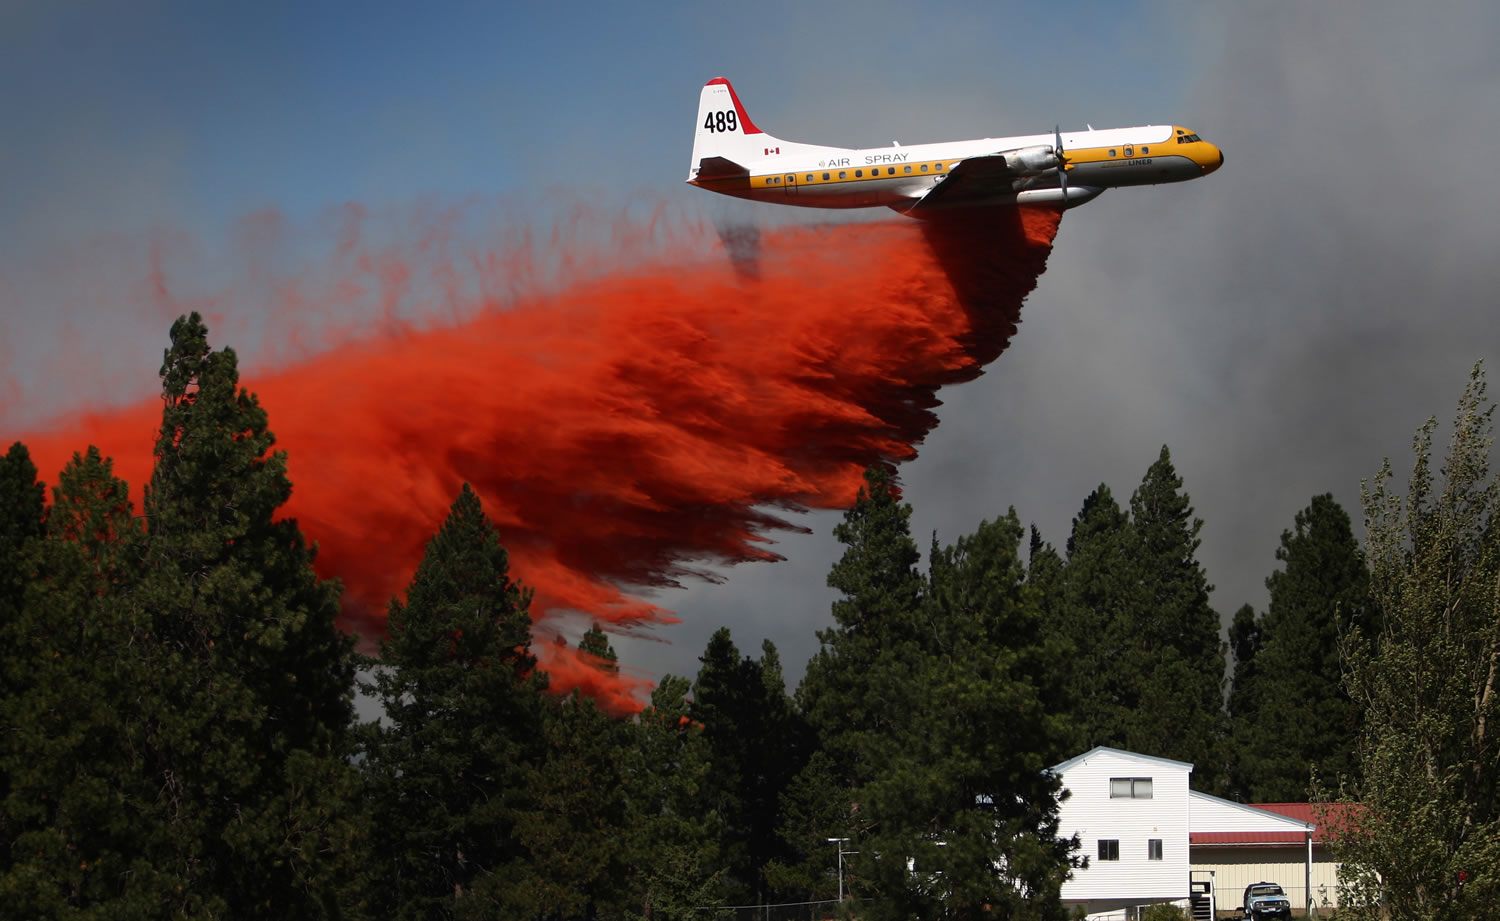 A plane drops retardant to create a fire break at the Sunlight Waters housing development Tuesday near Cle Elum. About 800 people were assigned to fight the Taylor Bridge fire, about 75 miles east of Seattle.